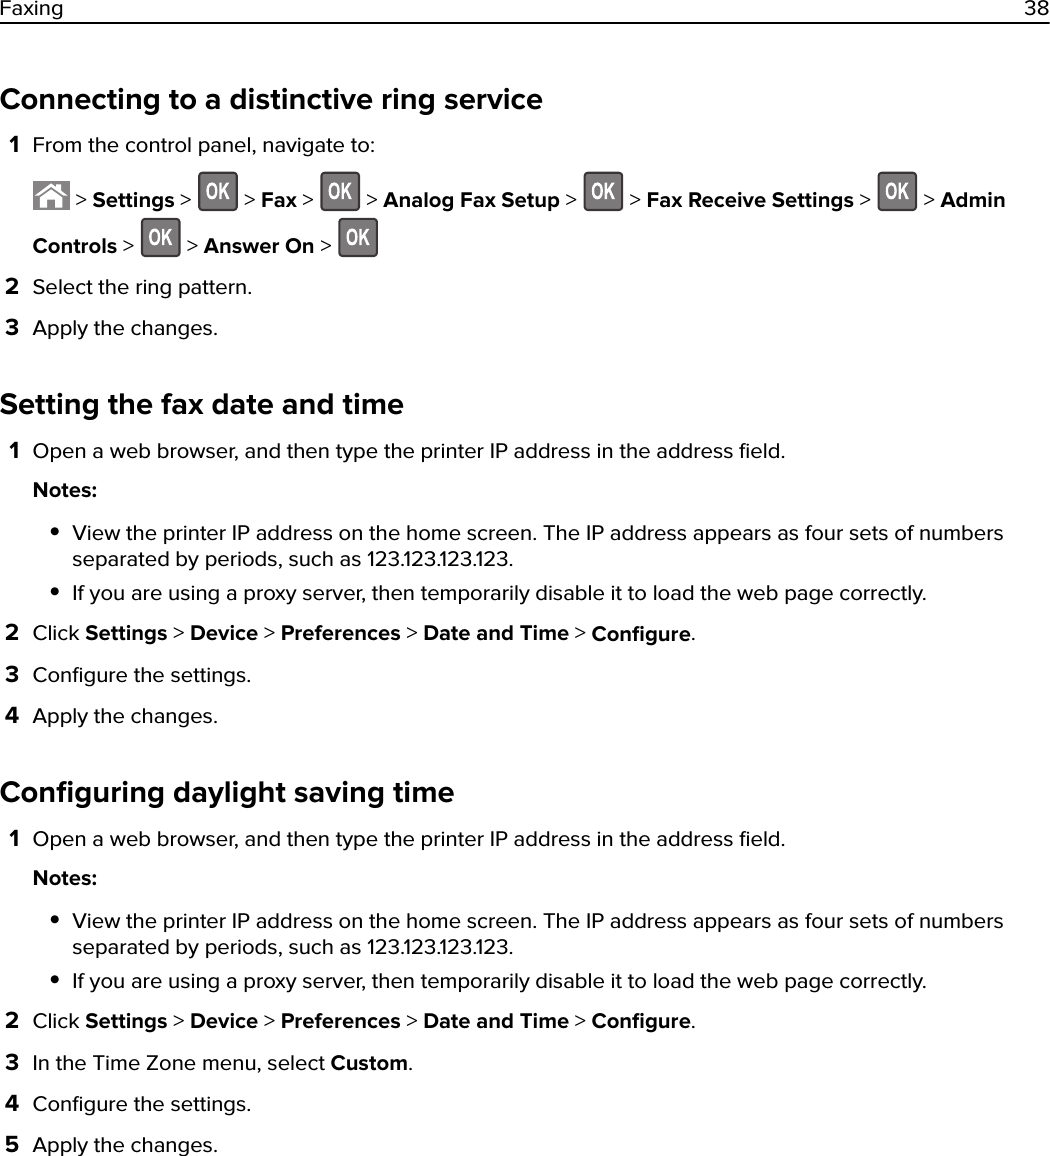 Connecting to a distinctive ring service1From the control panel, navigate to: &gt; Settings &gt;   &gt; Fax &gt;   &gt; Analog Fax Setup &gt;   &gt; Fax Receive Settings &gt;   &gt; AdminControls &gt;   &gt; Answer On &gt; 2Select the ring pattern.3Apply the changes.Setting the fax date and time1Open a web browser, and then type the printer IP address in the address ﬁeld.Notes:•View the printer IP address on the home screen. The IP address appears as four sets of numbersseparated by periods, such as 123.123.123.123.•If you are using a proxy server, then temporarily disable it to load the web page correctly.2Click Settings &gt; Device &gt; Preferences &gt; Date and Time &gt; Conﬁgure.3Conﬁgure the settings.4Apply the changes.Conﬁguring daylight saving time1Open a web browser, and then type the printer IP address in the address ﬁeld.Notes:•View the printer IP address on the home screen. The IP address appears as four sets of numbersseparated by periods, such as 123.123.123.123.•If you are using a proxy server, then temporarily disable it to load the web page correctly.2Click Settings &gt; Device &gt; Preferences &gt; Date and Time &gt; Conﬁgure.3In the Time Zone menu, select Custom.4Conﬁgure the settings.5Apply the changes.Faxing 38